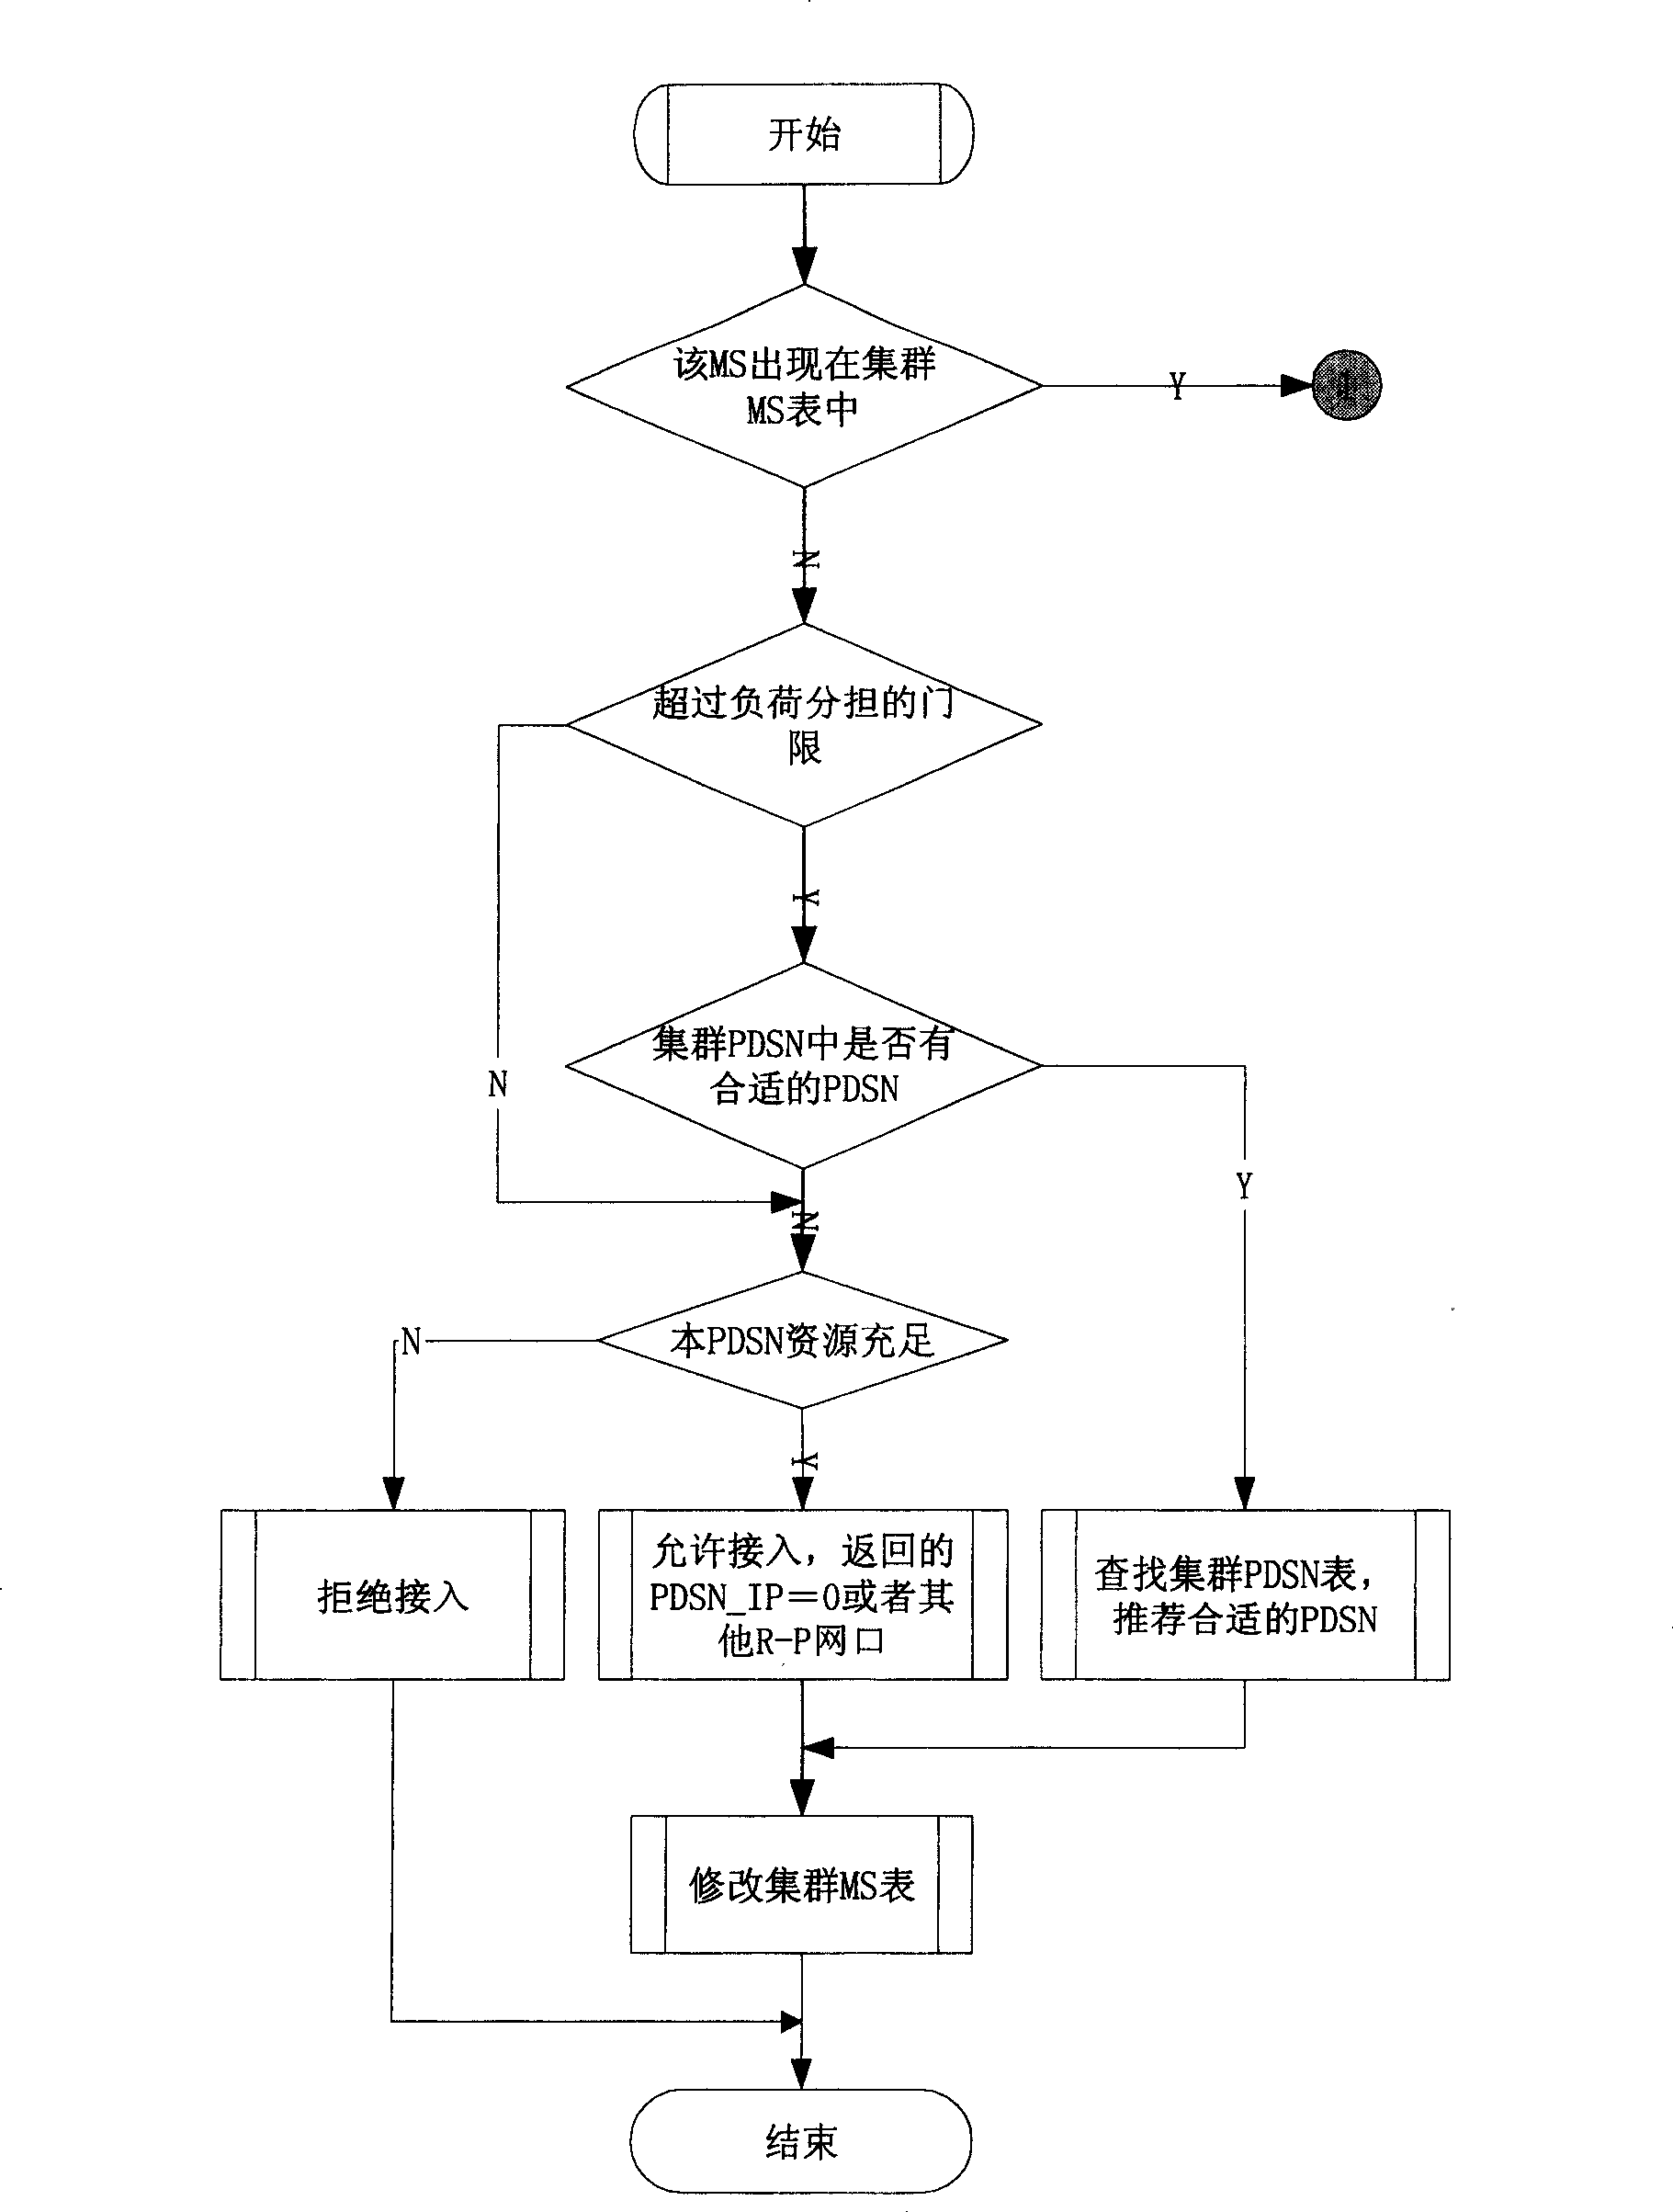 Aggregating method between group data service nodal joints